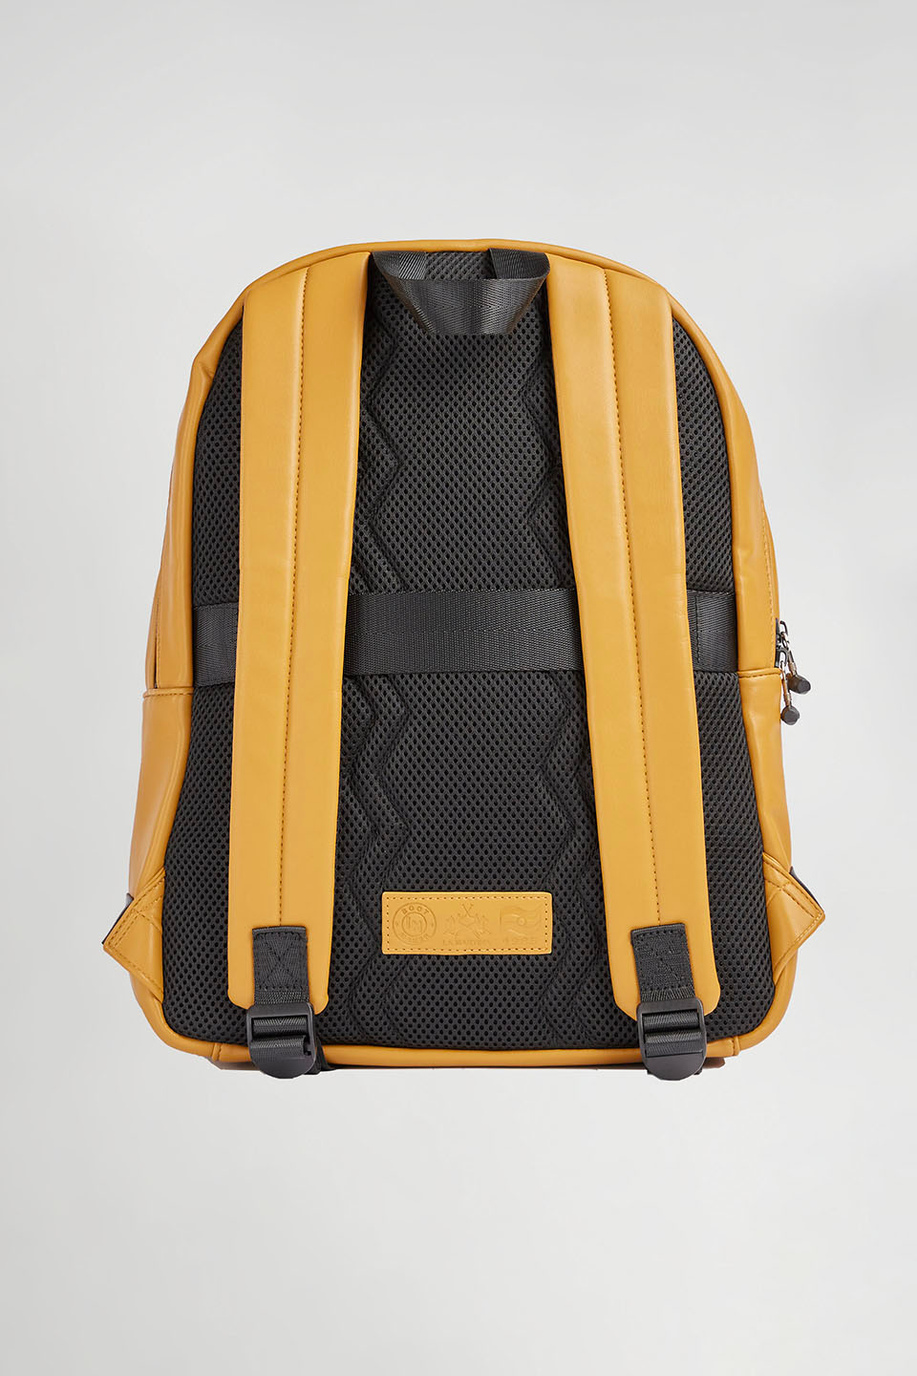 PU leather backpack - Accessories Man | La Martina - Official Online Shop